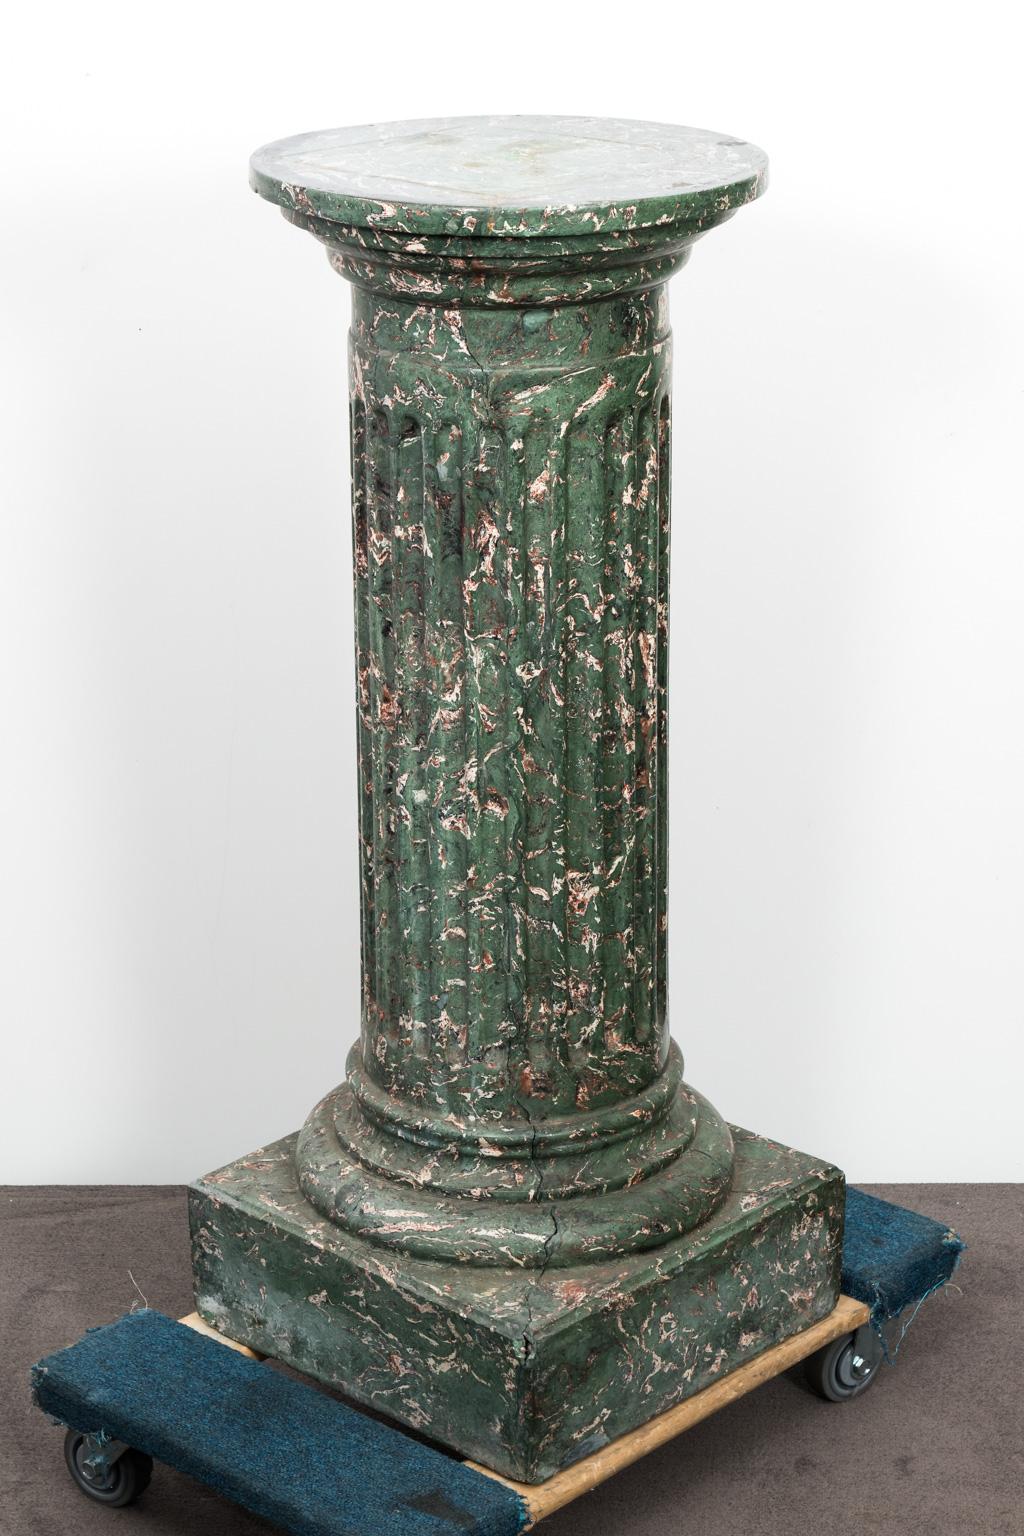 Faux marble fluted column pedestals in Scagliola finished stucco, circa 19th century.
  